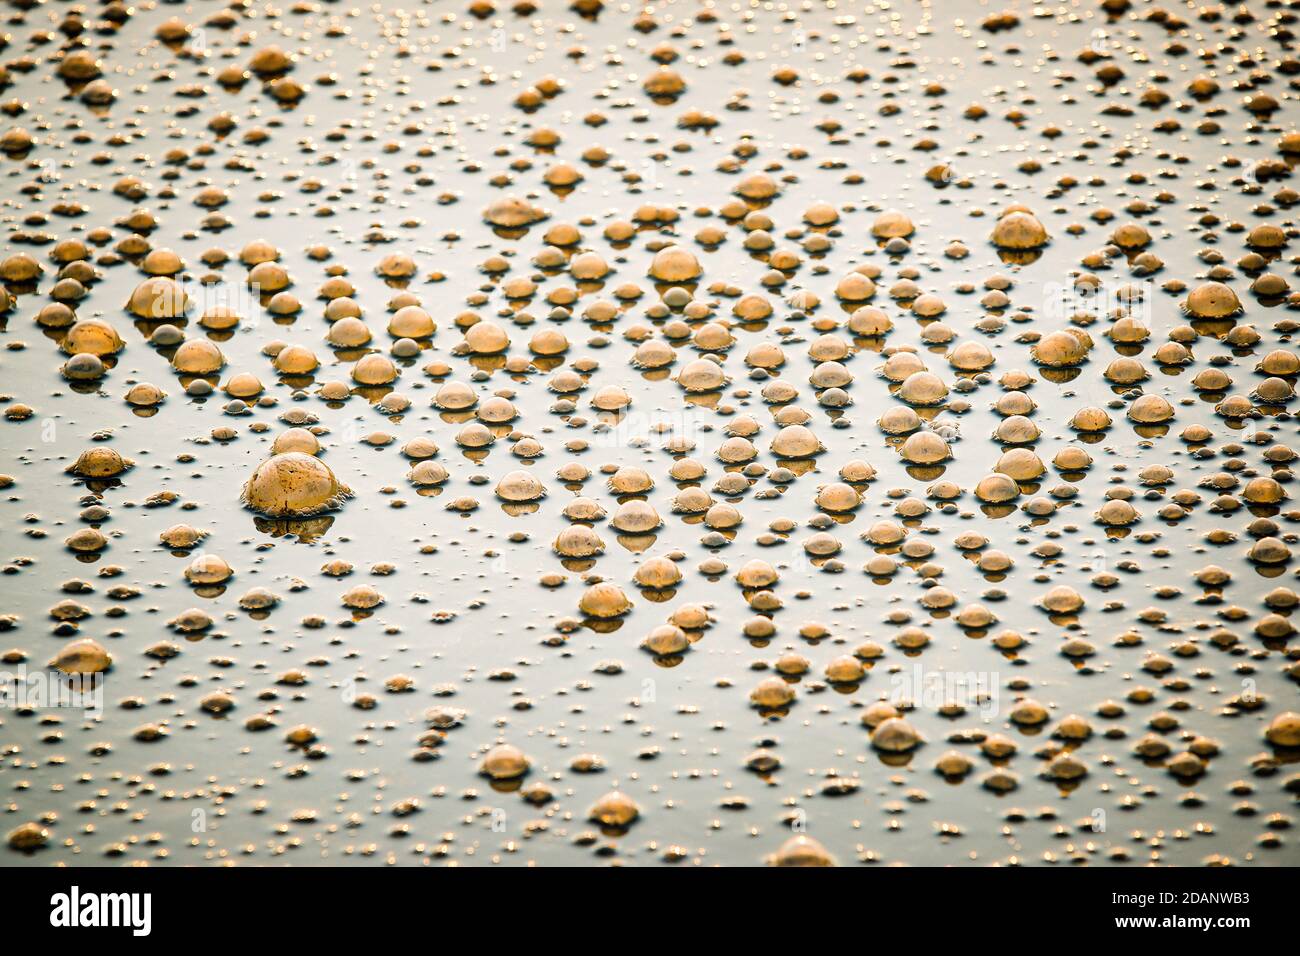 Polution In The River Medway With Bubbles From The Dirty Water That has Been Poluted Over The Years Stock Photo